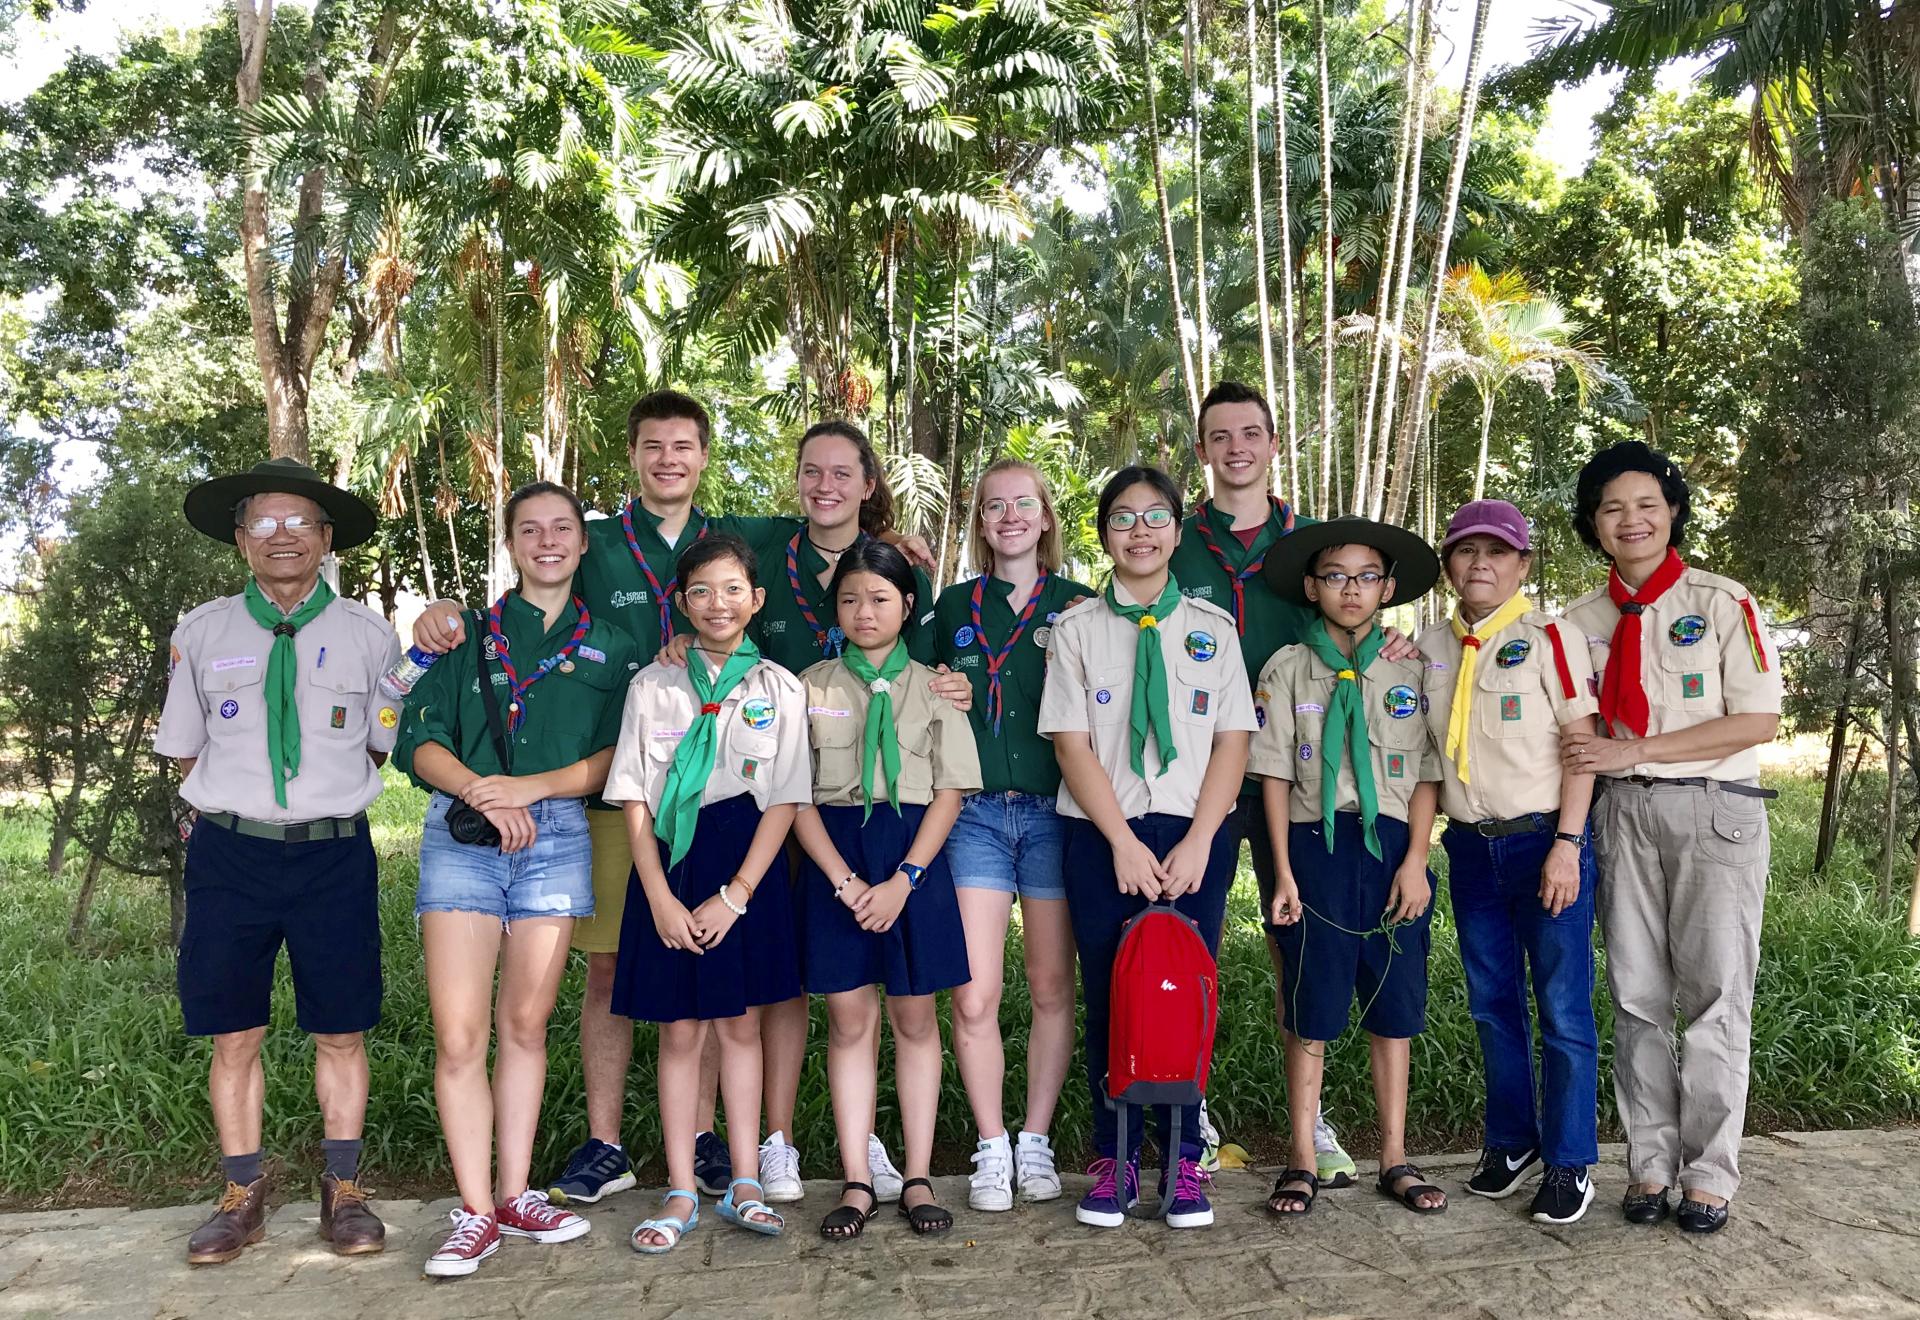 Rencontre Scouts VN  (7)